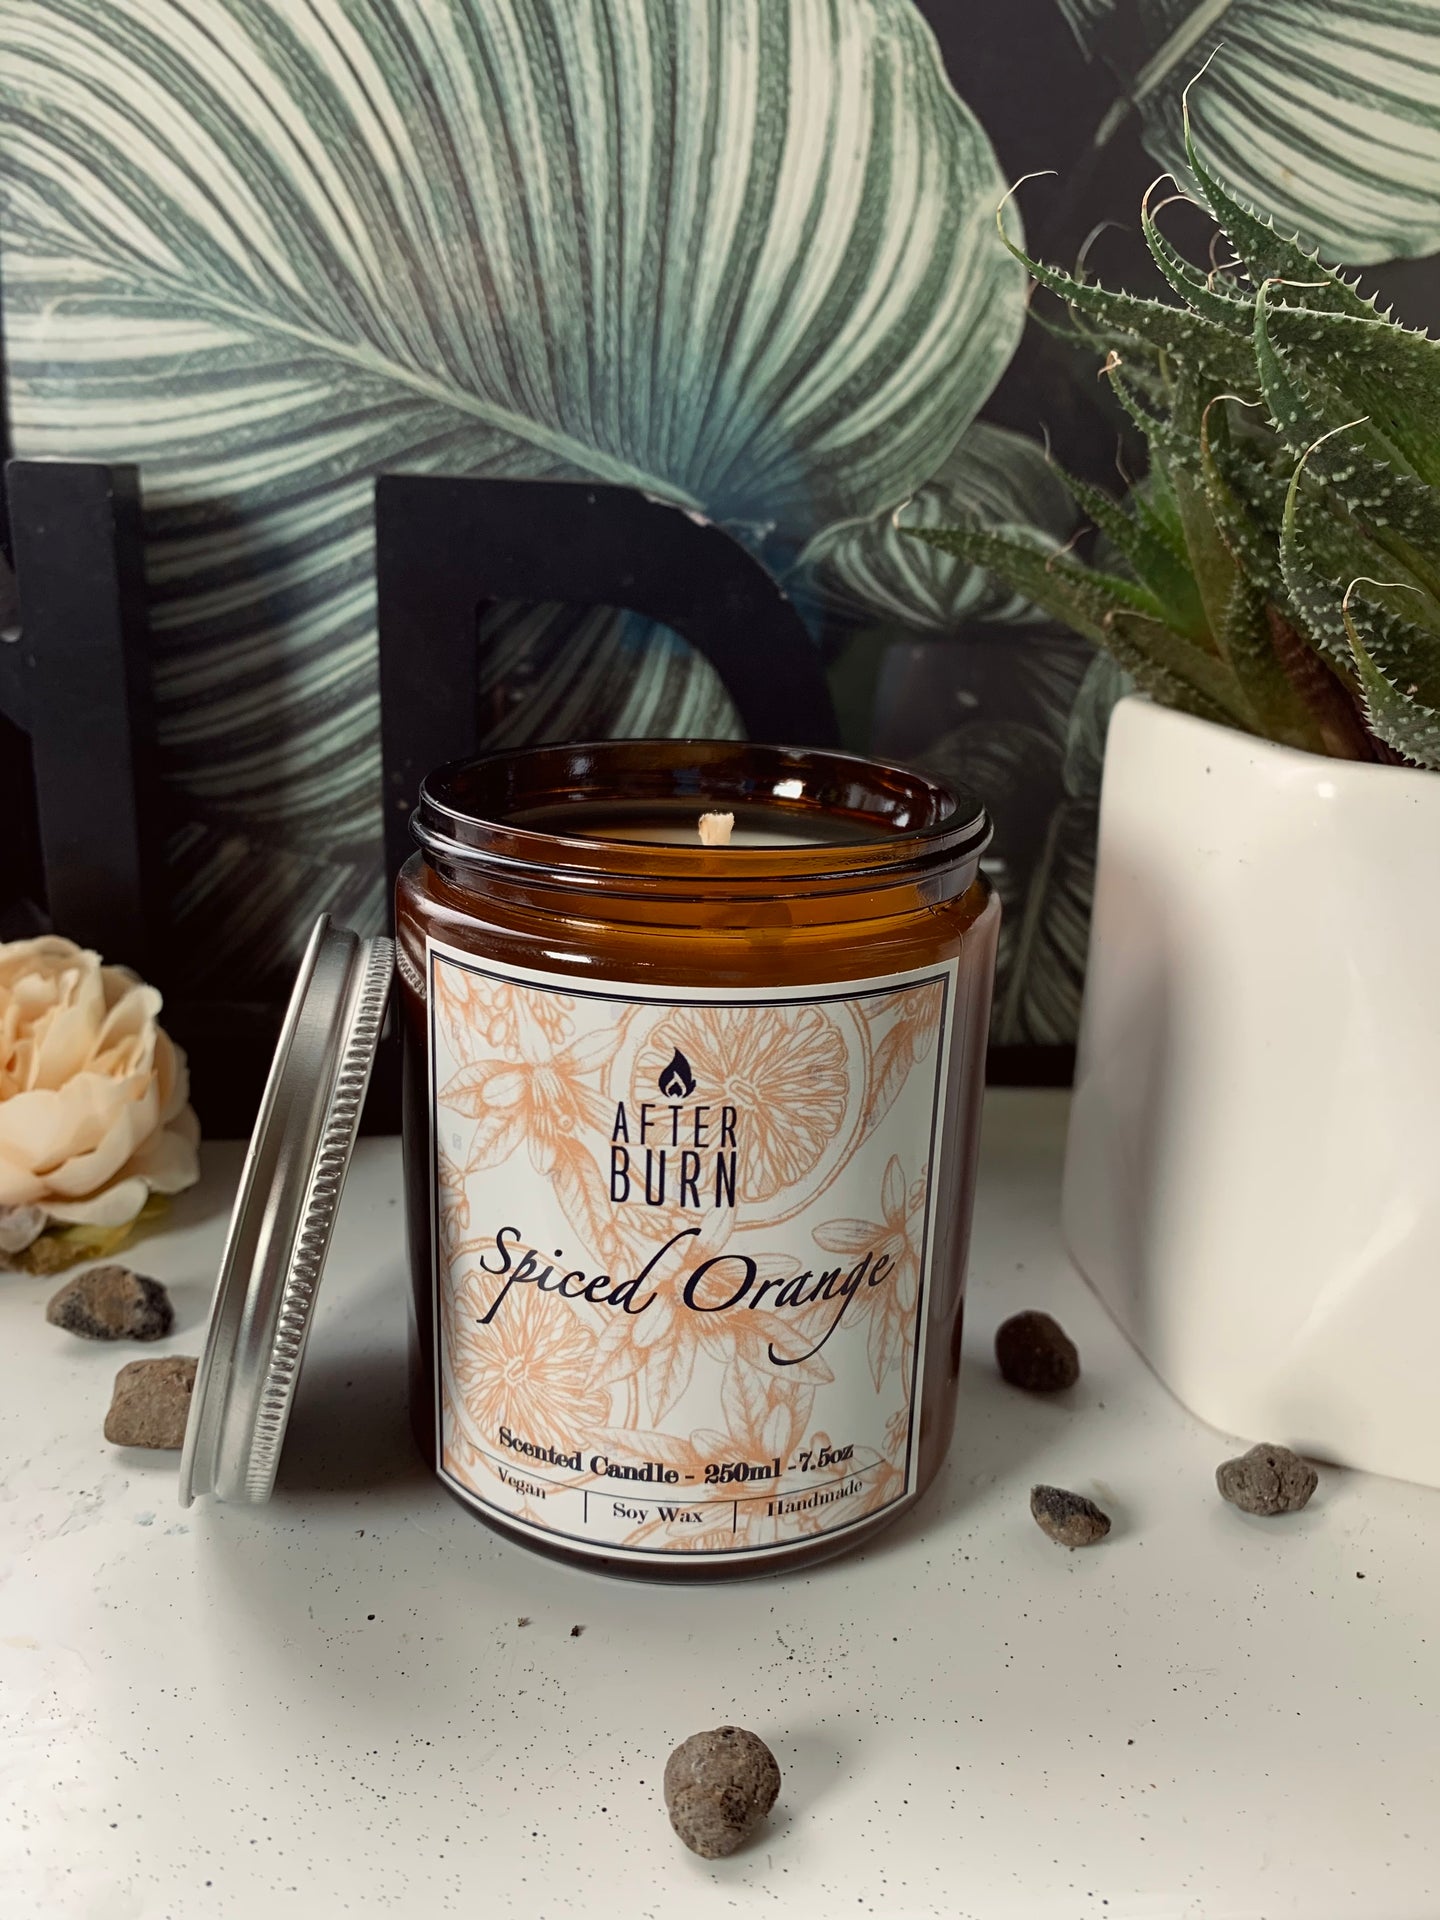 250ml Spiced Orange Scented Candle